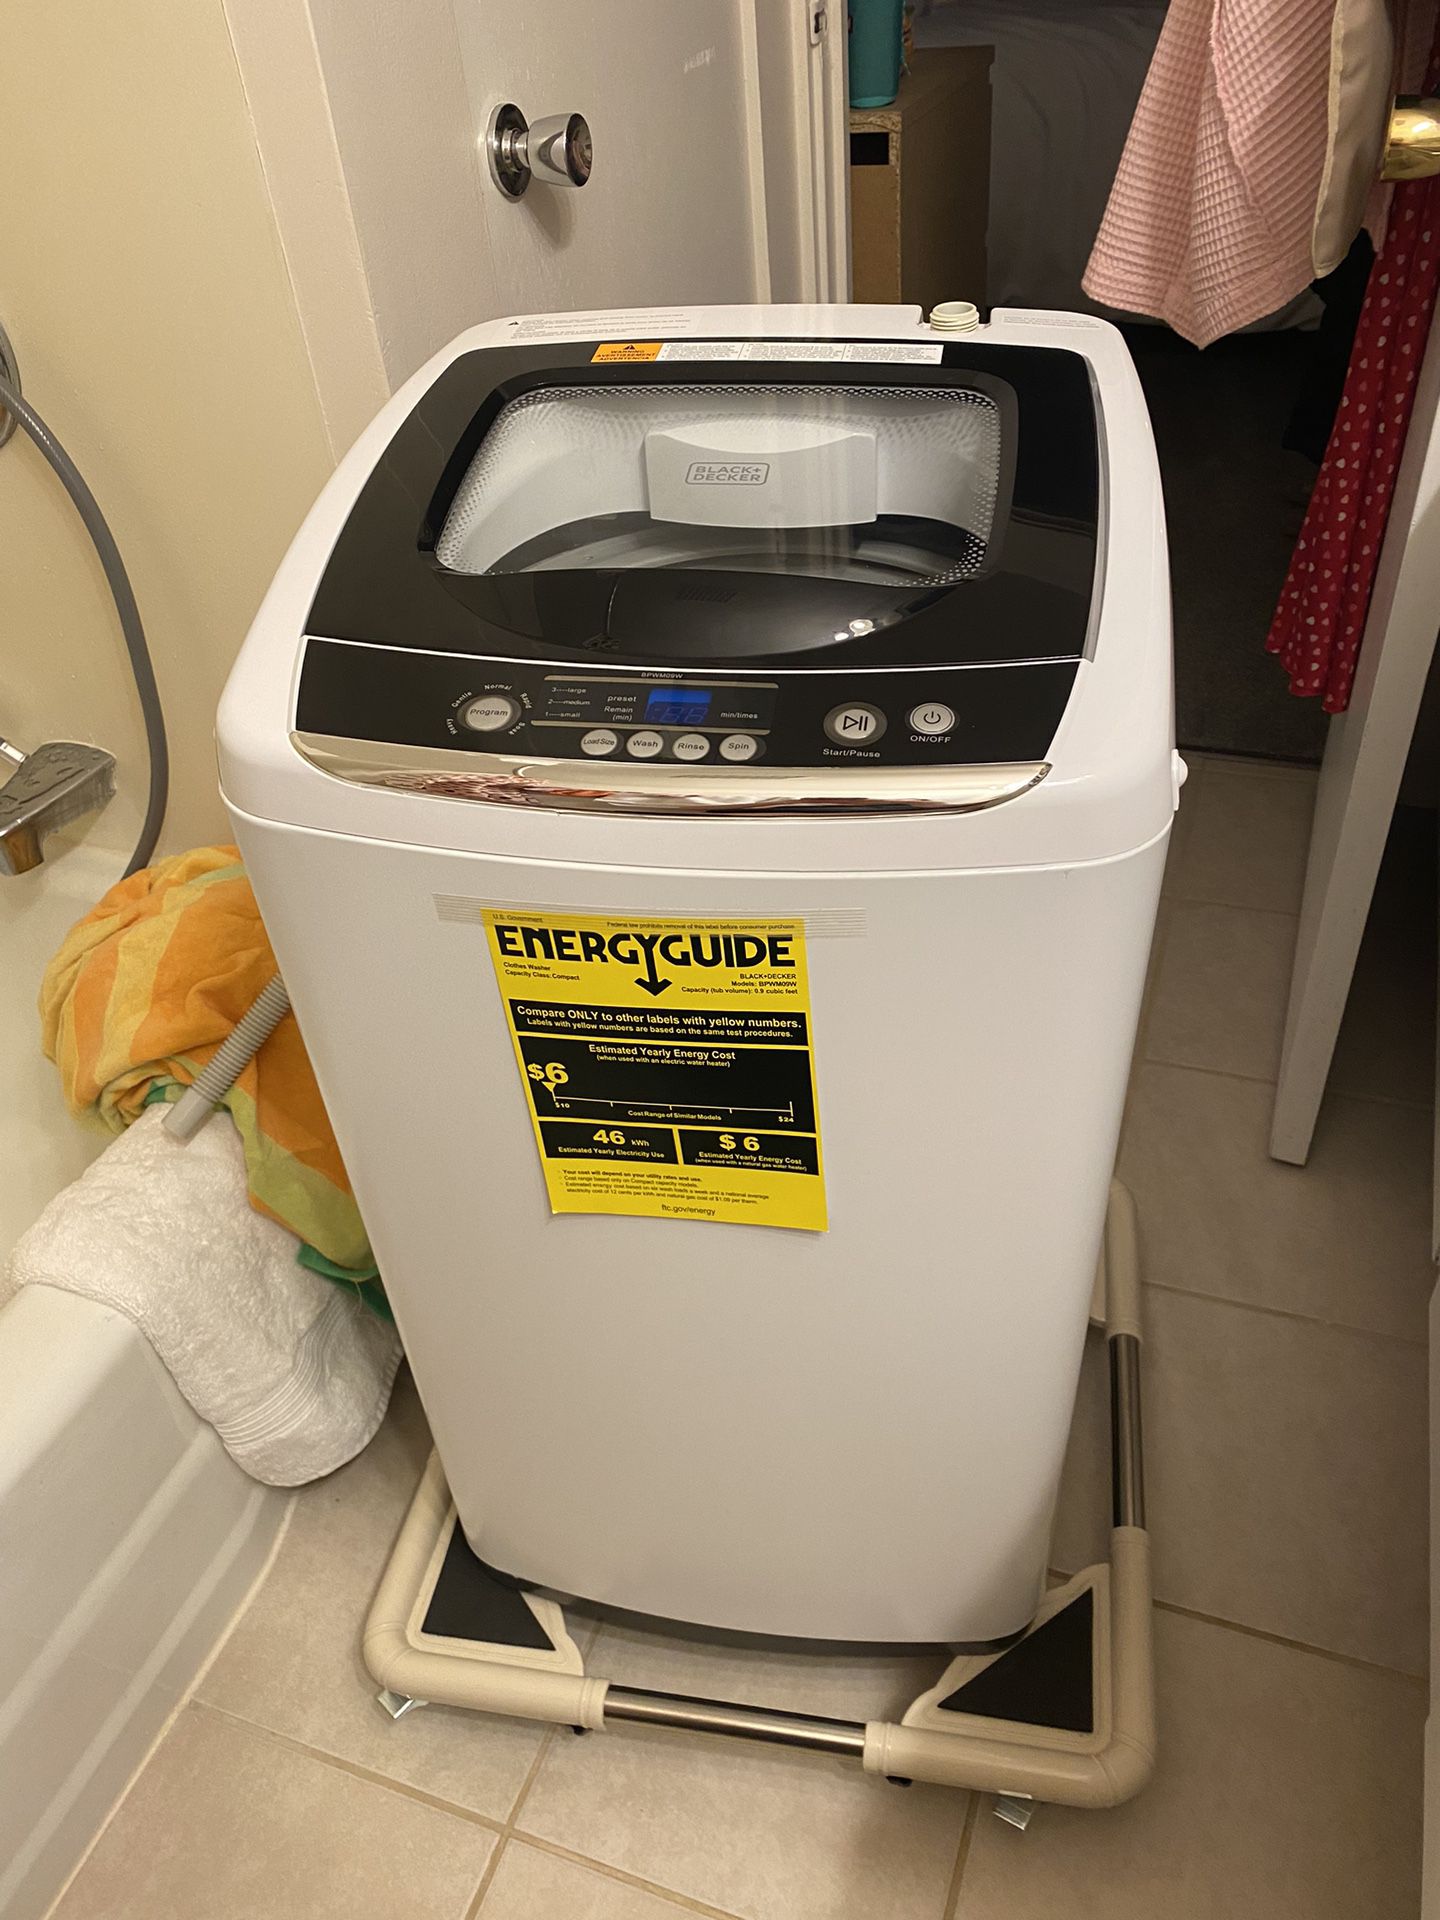 BPWM09W 0.9 Cu. Ft. Portable Washer – Product Information Center